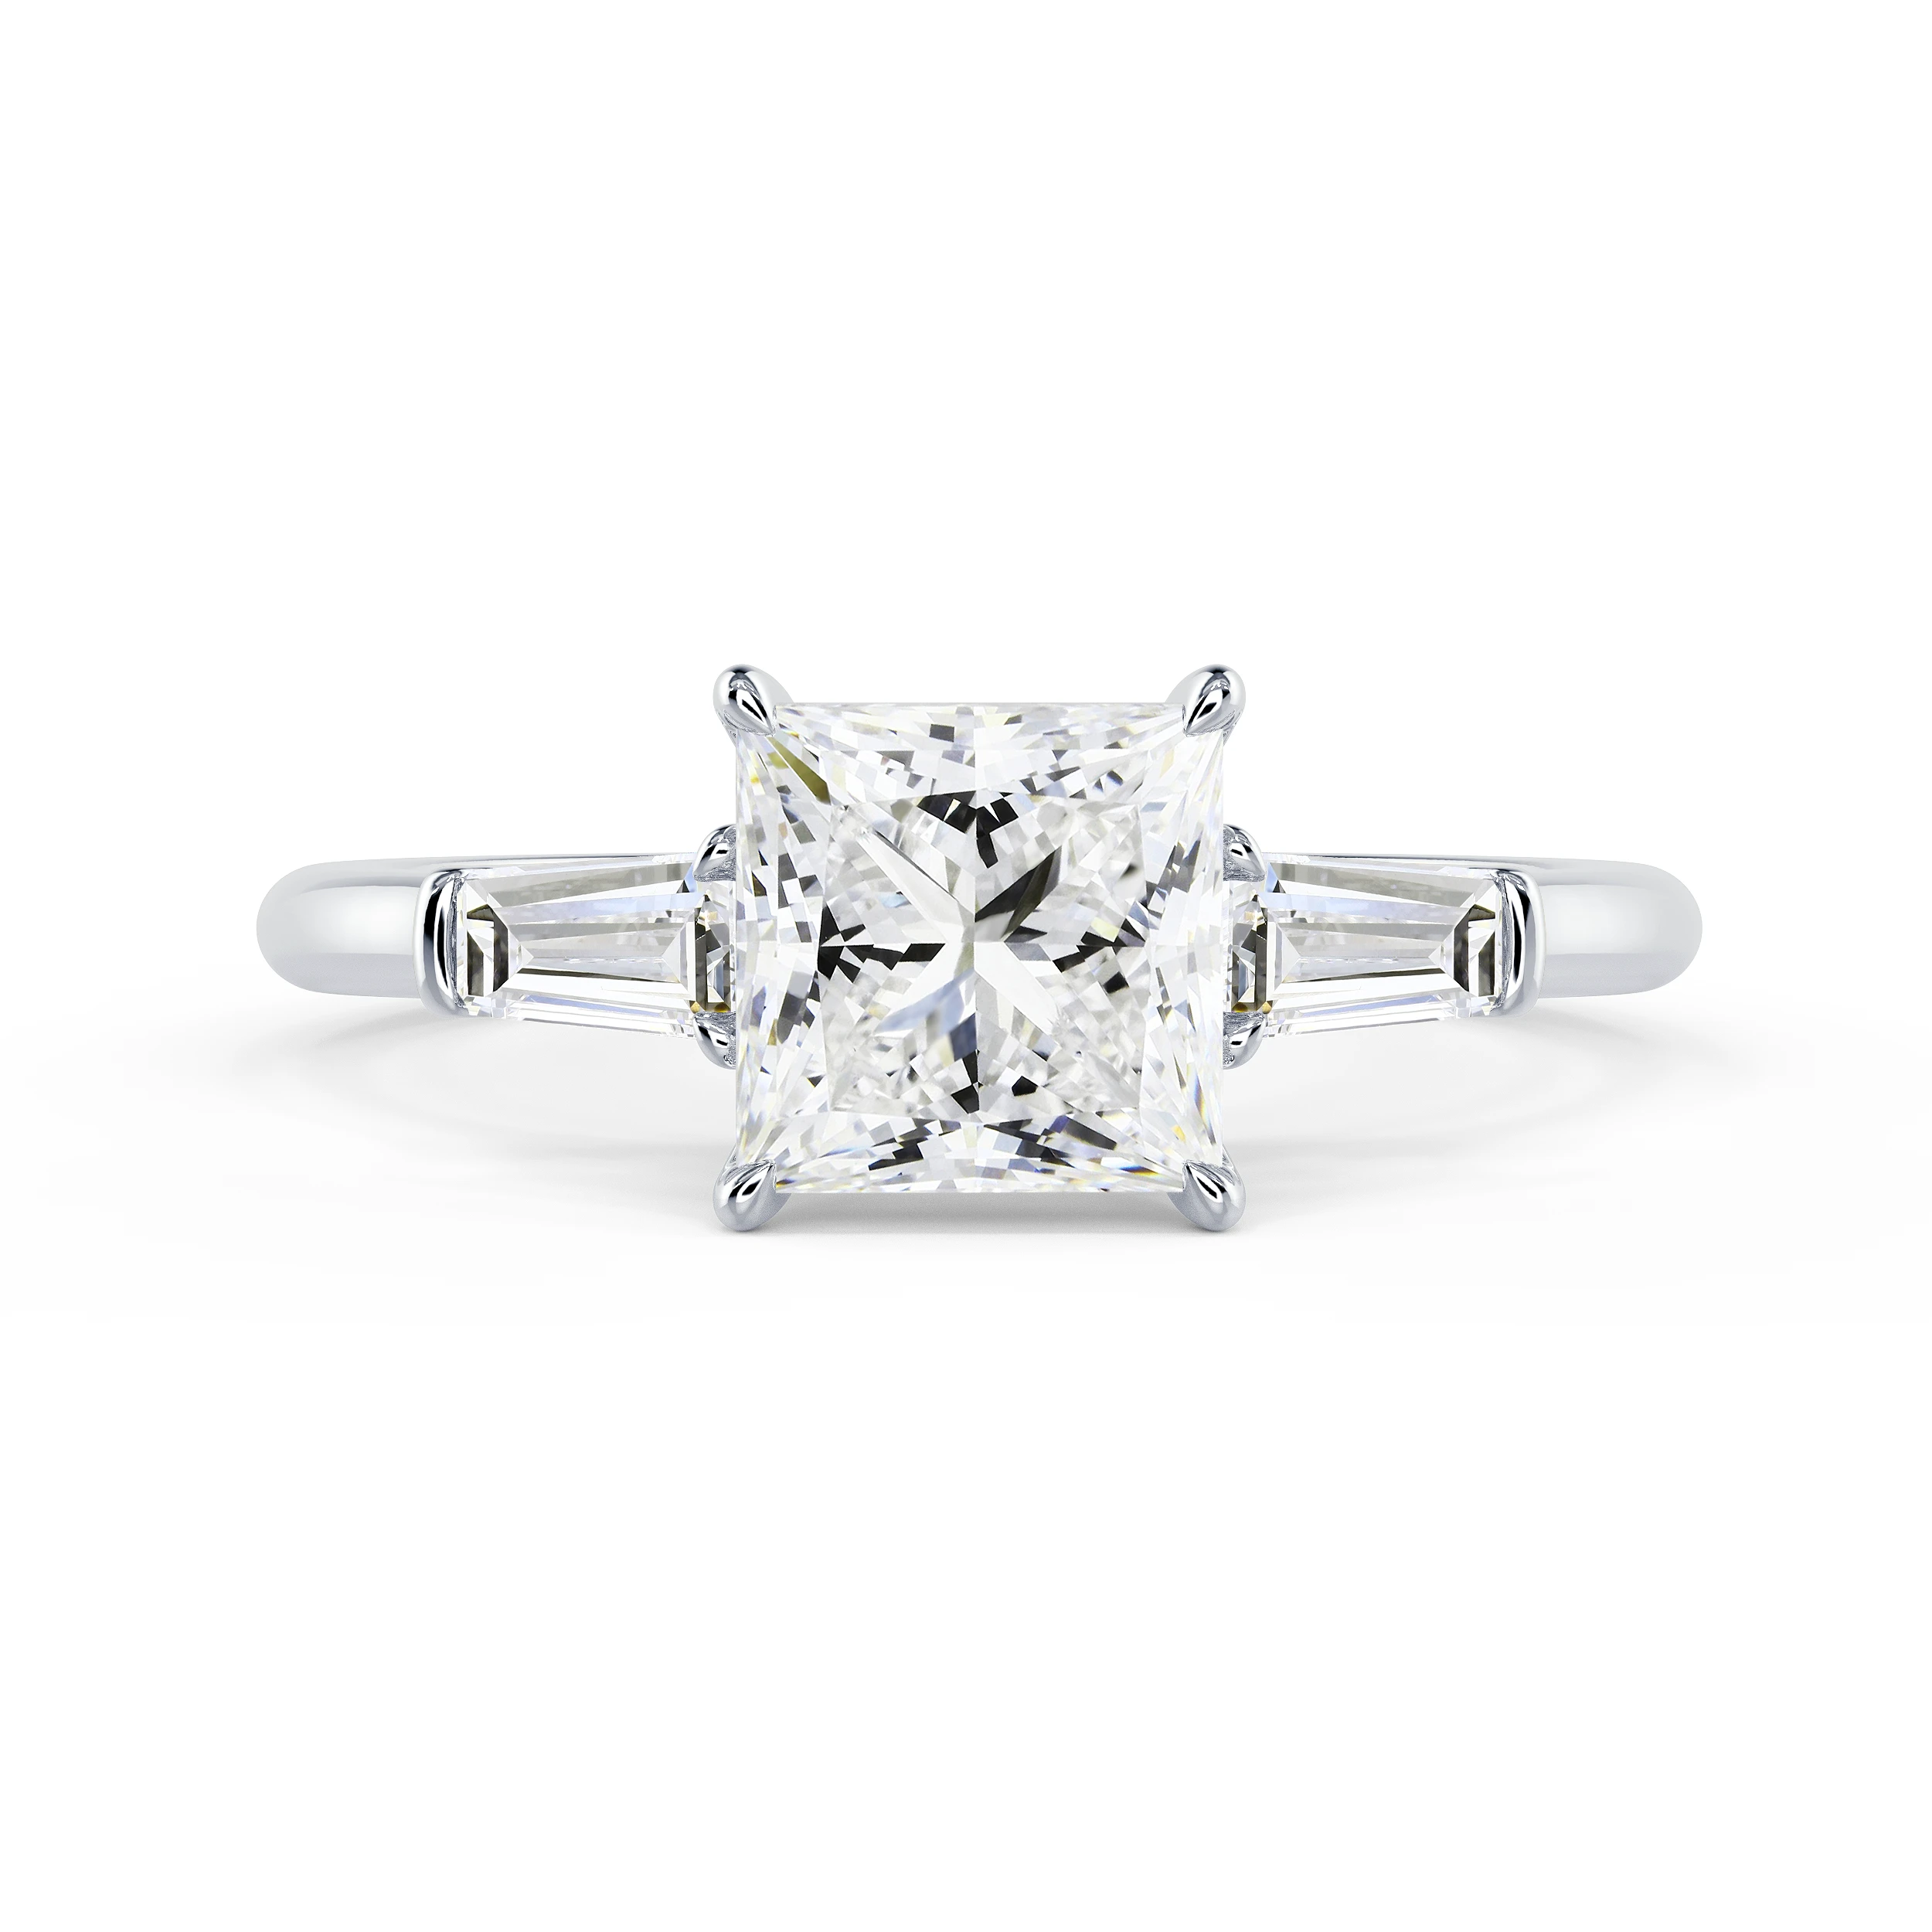 White Gold Princess and Baguette Setting featuring Hand Selected Lab Diamonds (Main View)